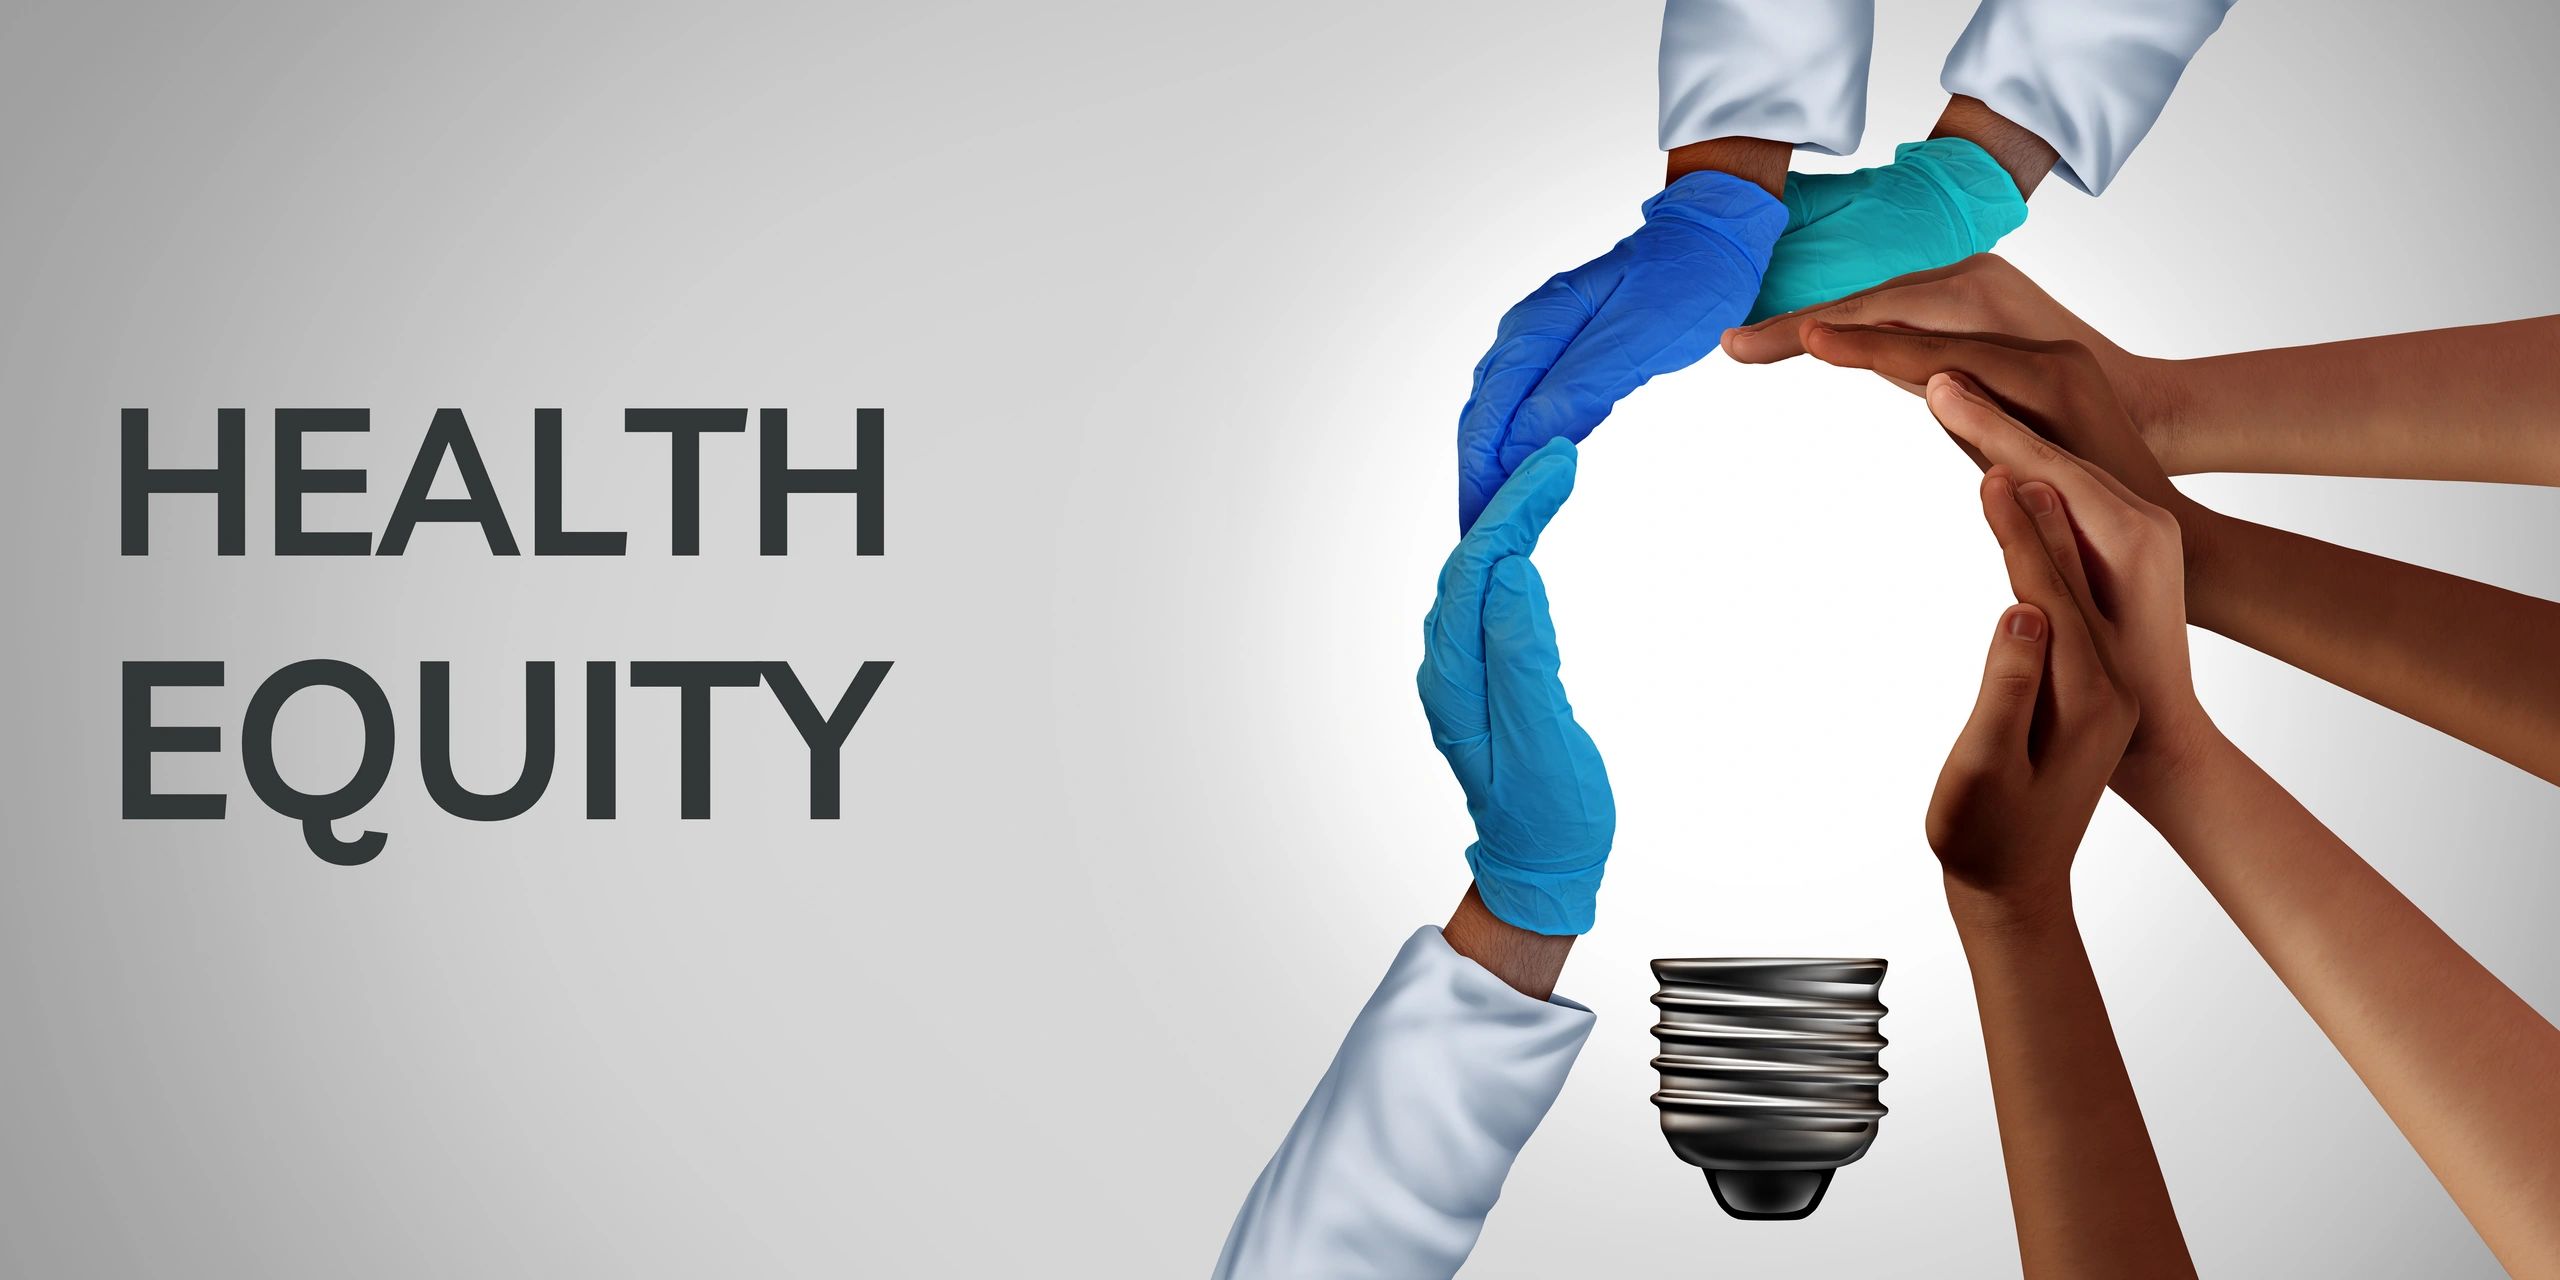 Health Equity, hands forming a light bulb